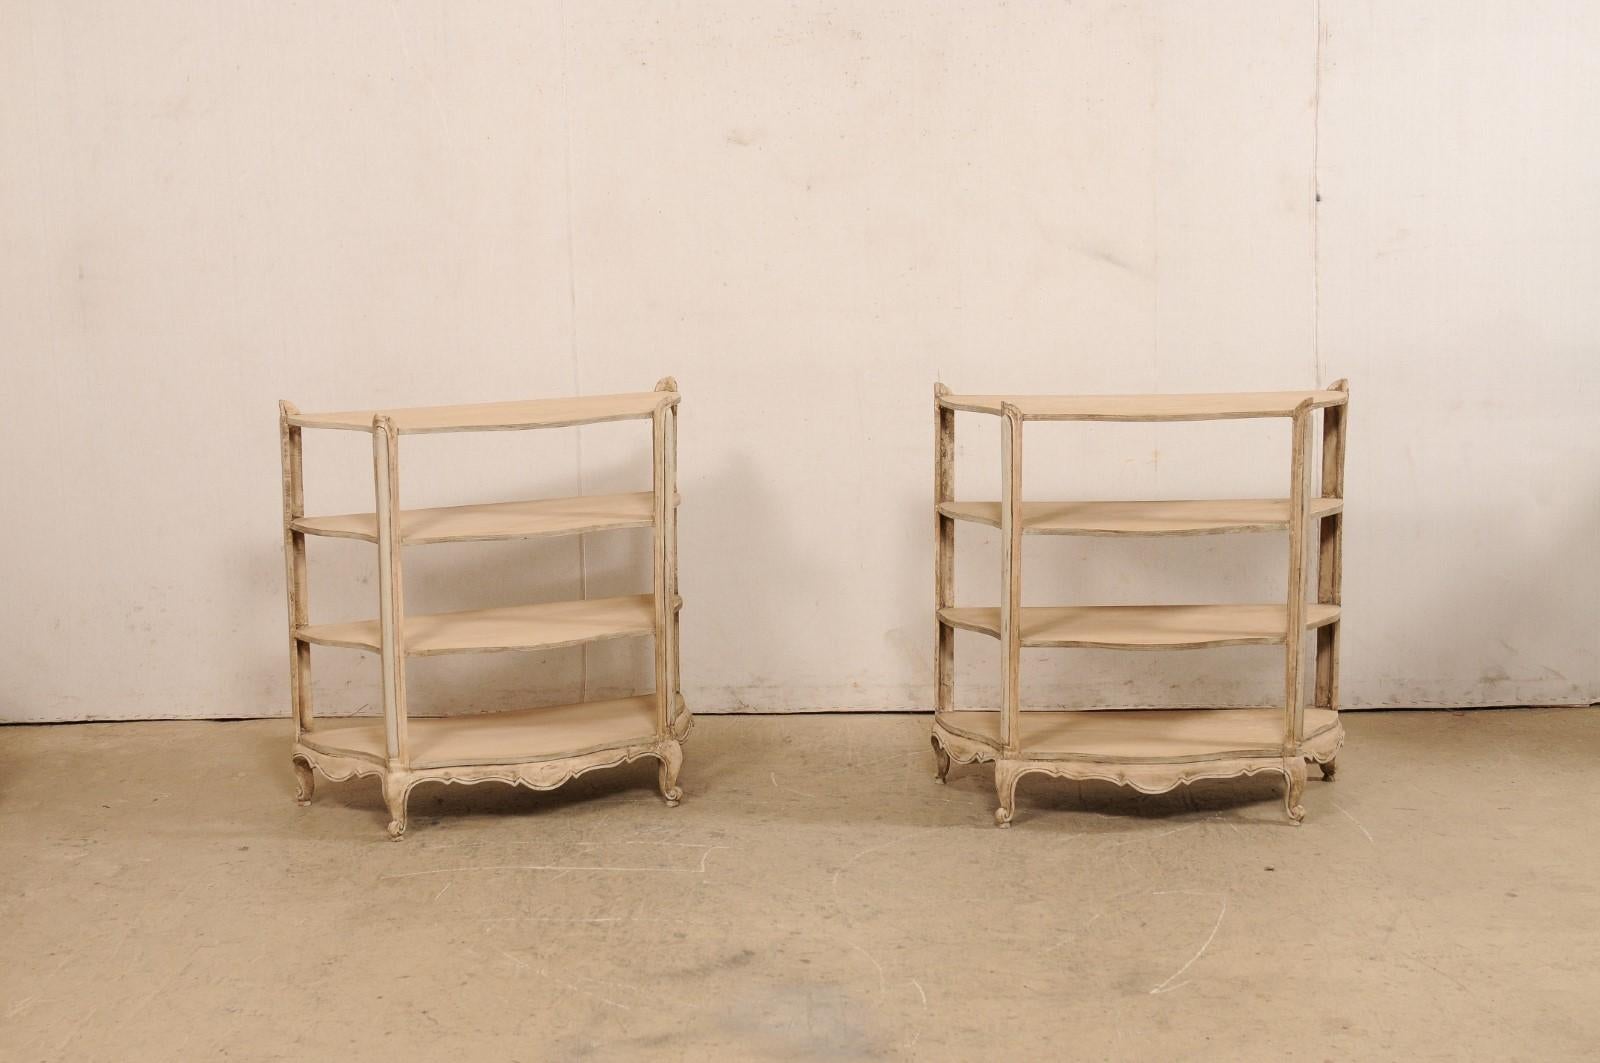 A French pair of painted bow-front wood display shelves from the mid 20th century. These vintage open display shelving units from France, each standing just shy of 3 feet in height, are fashioned with four levels of open shelving supported within